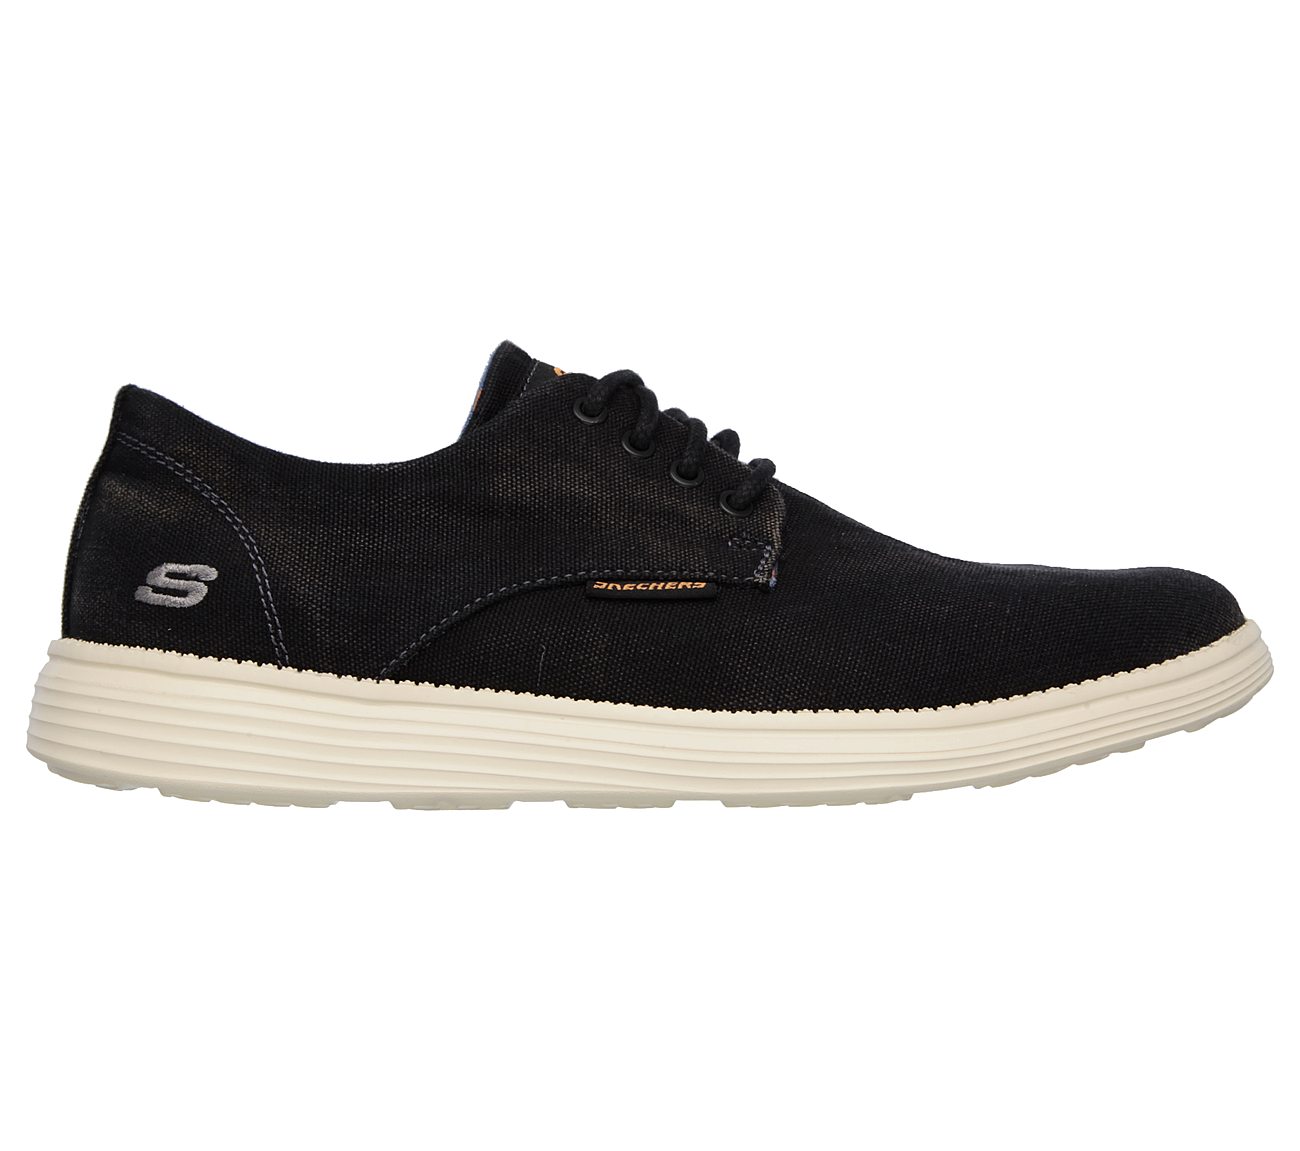 Borges SKECHERS Relaxed Fit Shoes